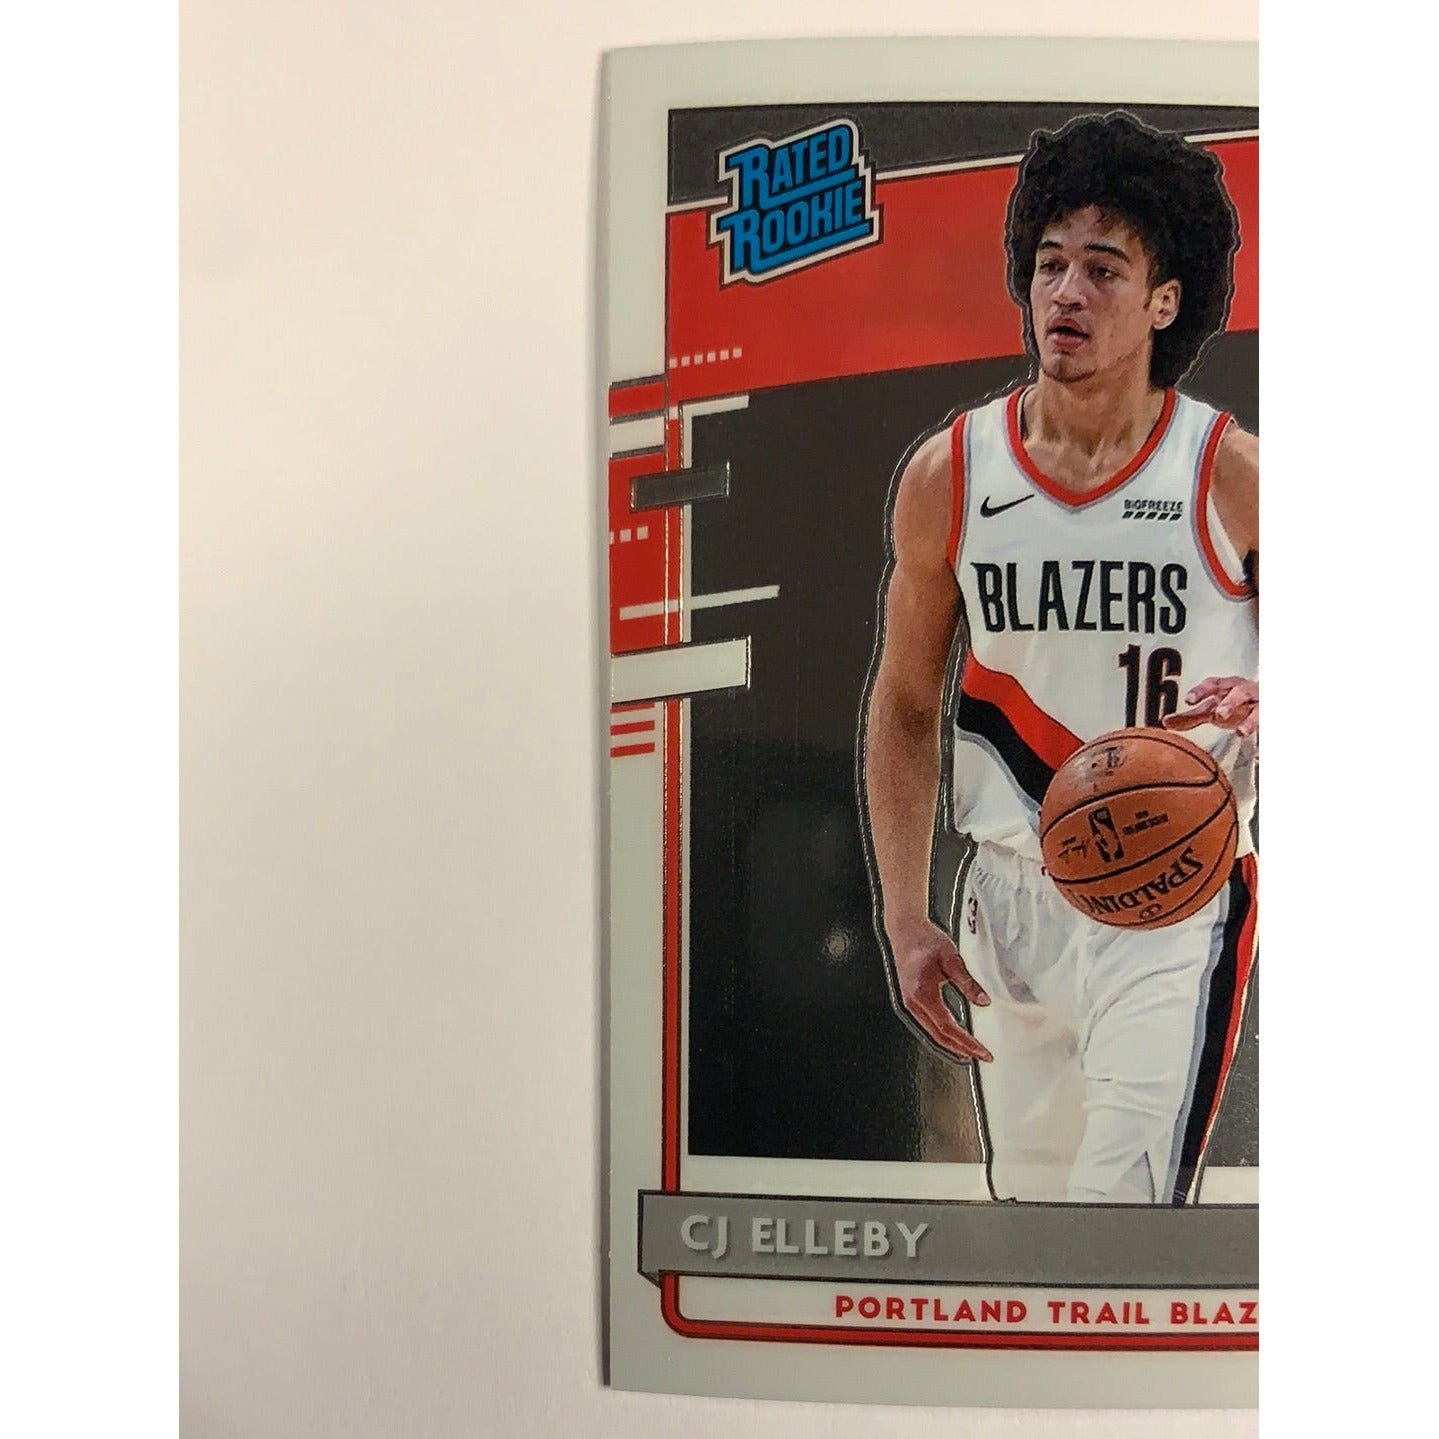  2020-21 Donruss Optic CJ Elleby Rated Rookie  Local Legends Cards & Collectibles